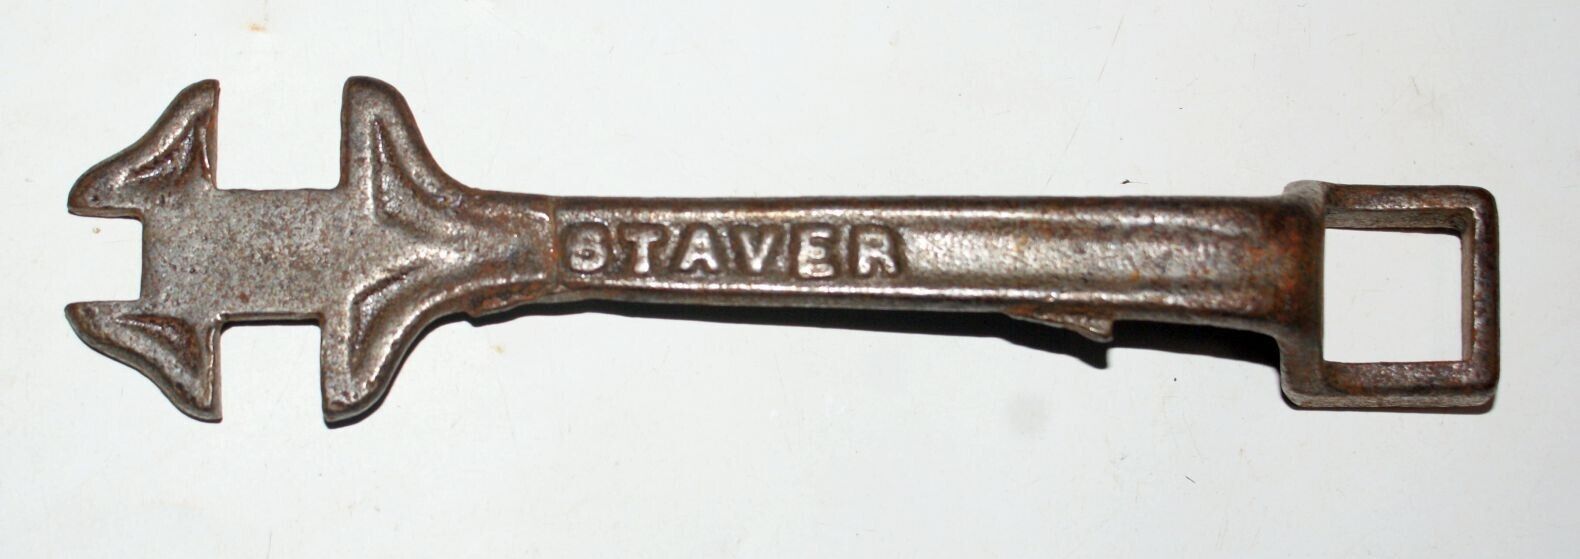 Old Vintage STAVER Carriage Co buggy Wrench Tool Chicago, IL